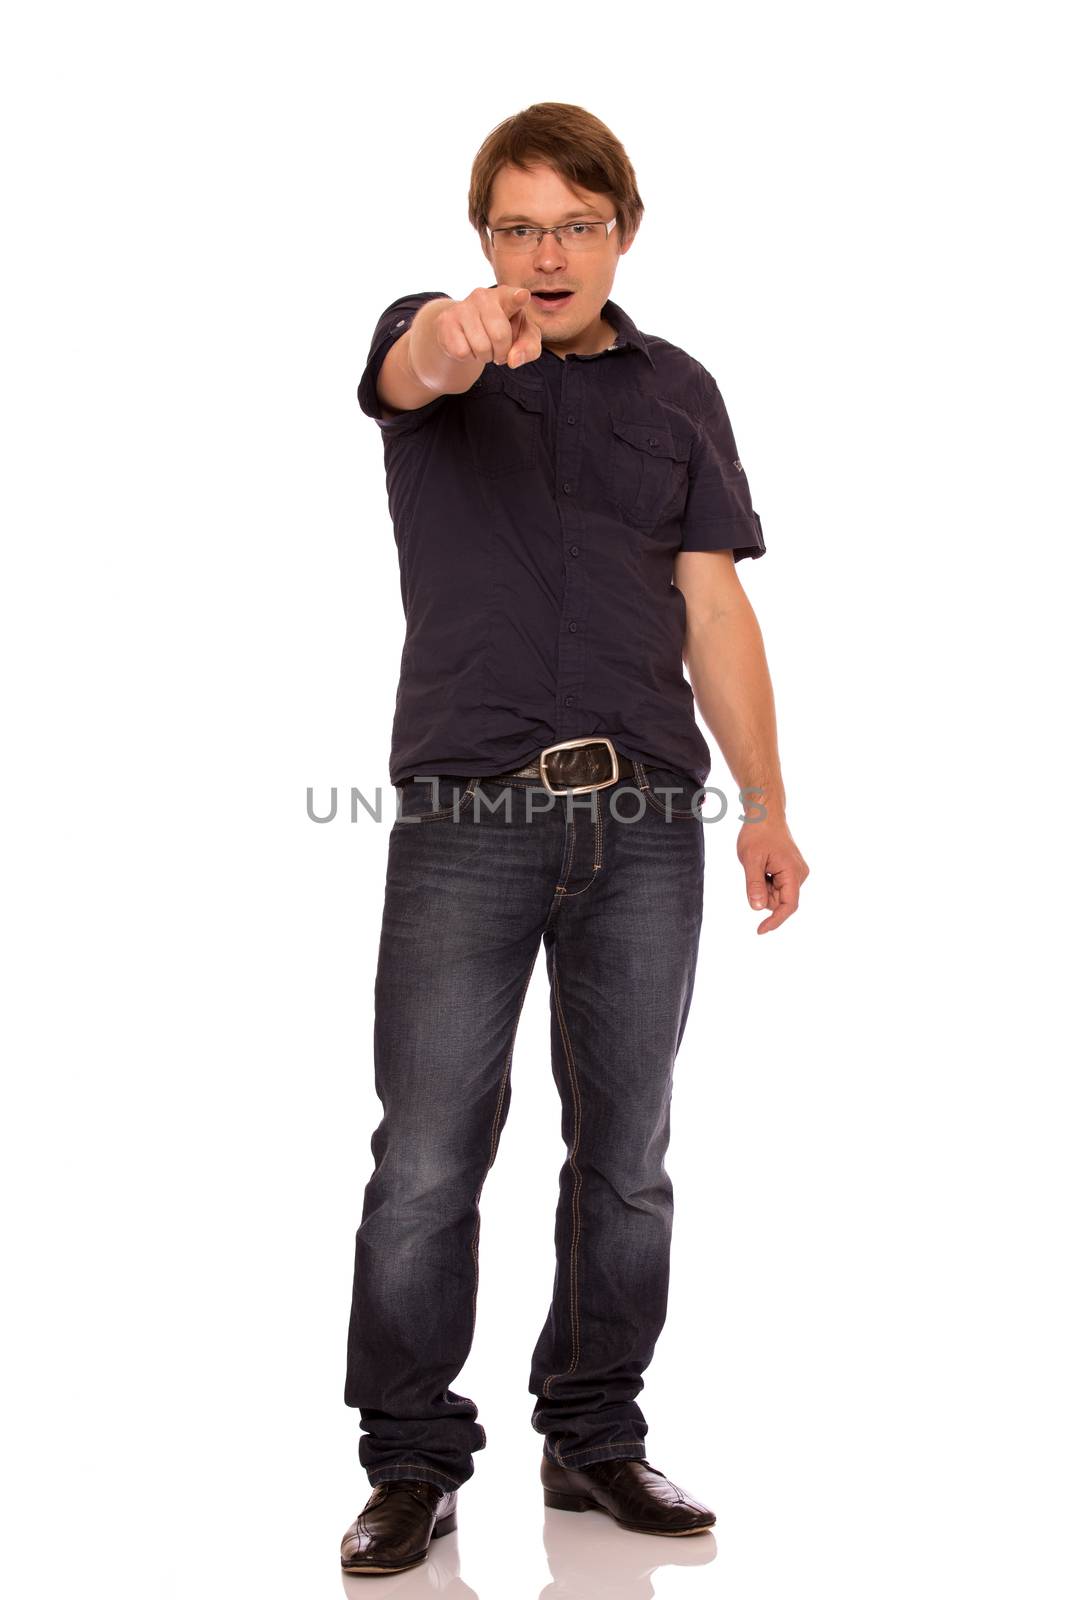 Man with glasses pointing the finger. Isolated on white background